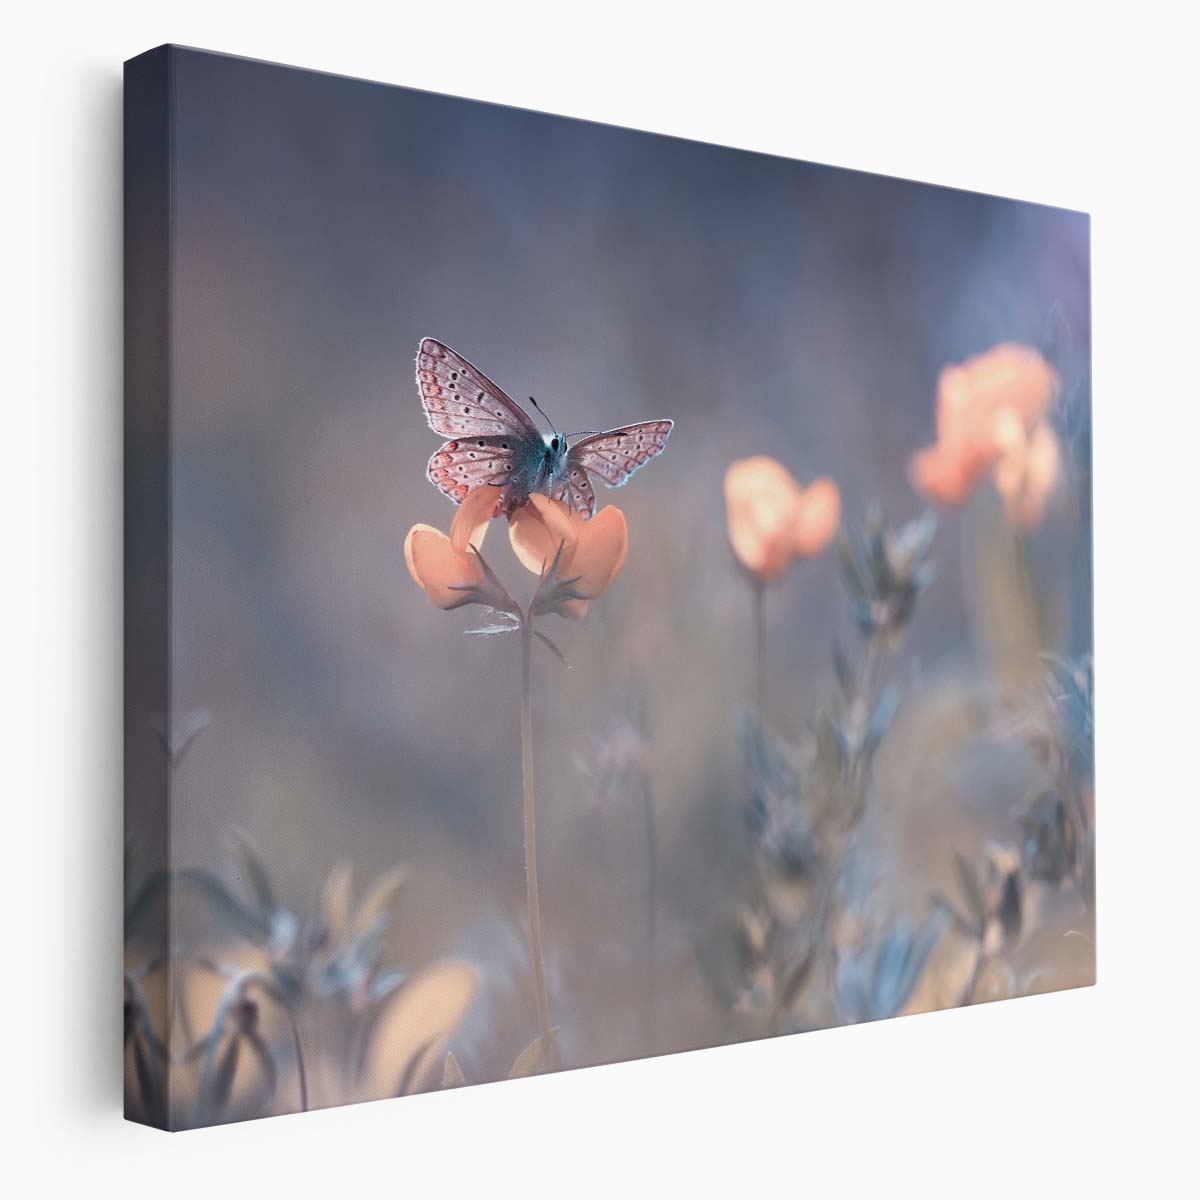 Dreamy Pastel Butterfly & Floral Meadow Macro Wall Art by Luxuriance Designs. Made in USA.